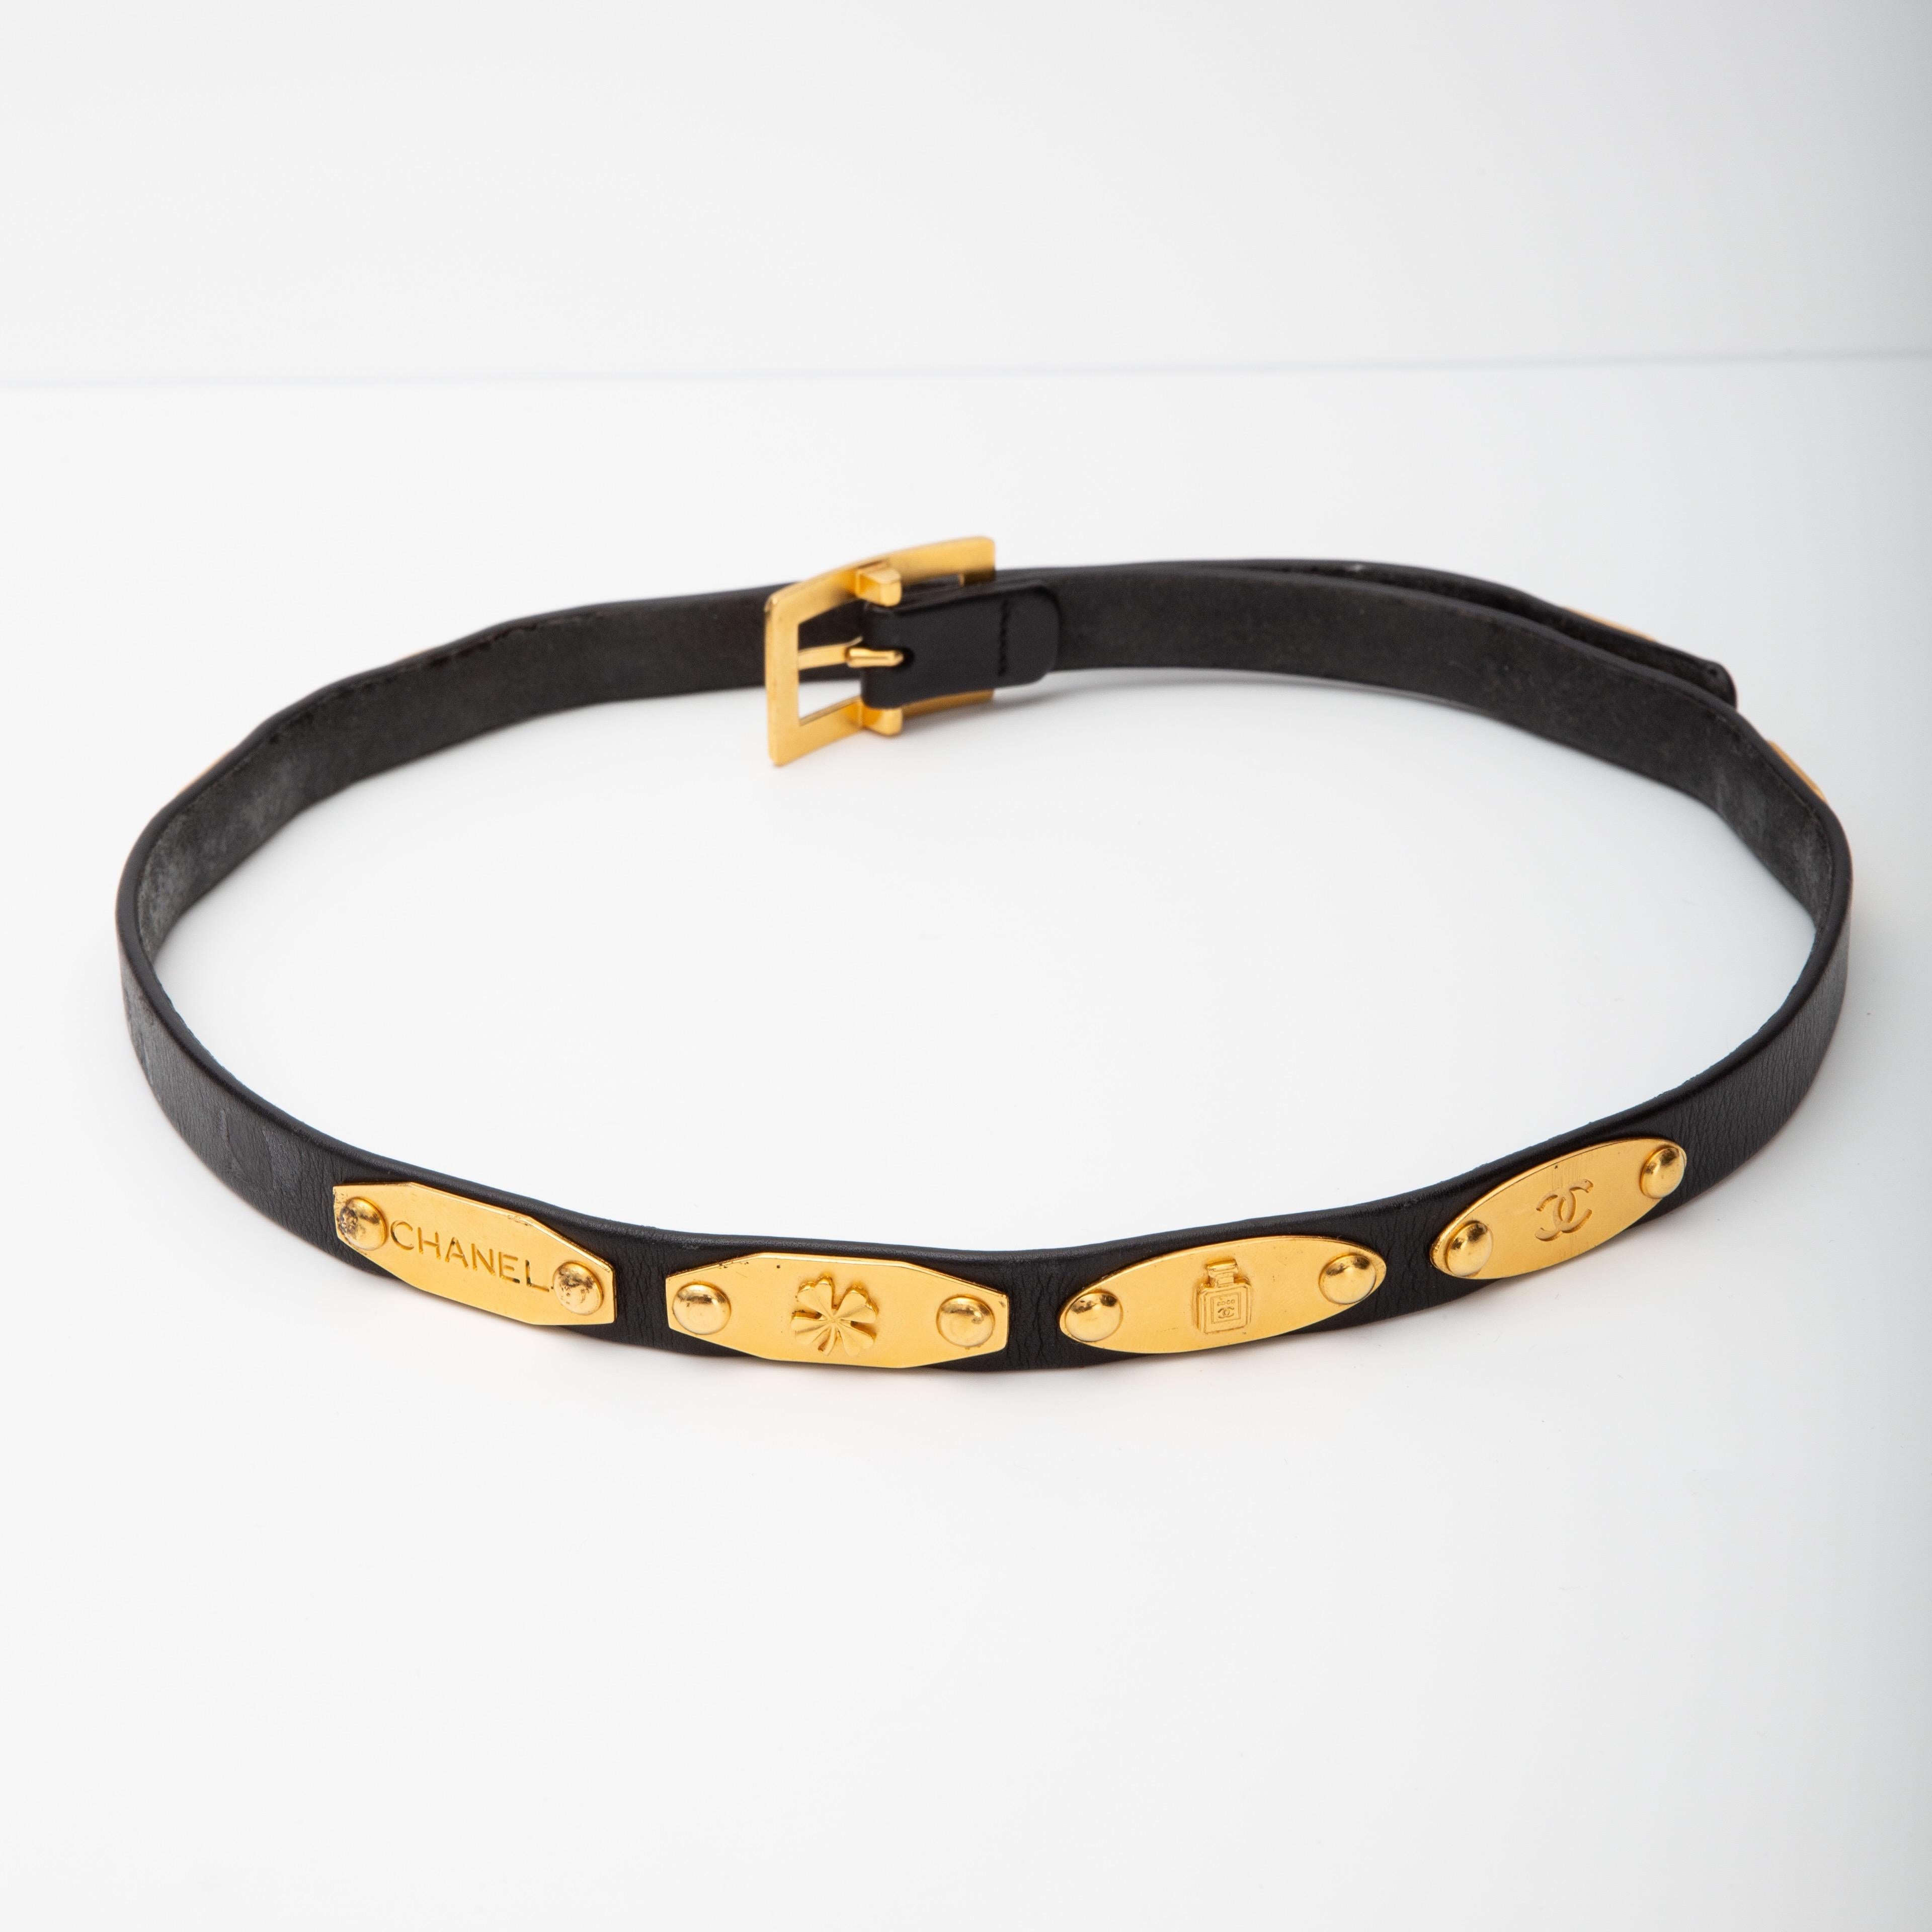 This belt is from the 1995-1996 collection.The belt features leather construction, gold tone hardware, buckle closure and Chanel embellishments.

COLOR: Black
MATERIAL: Leather
CODE: 95 [logo] A
MEASURES: L 30.5” x W .5”
COMES WITH: Box
CONDITION: